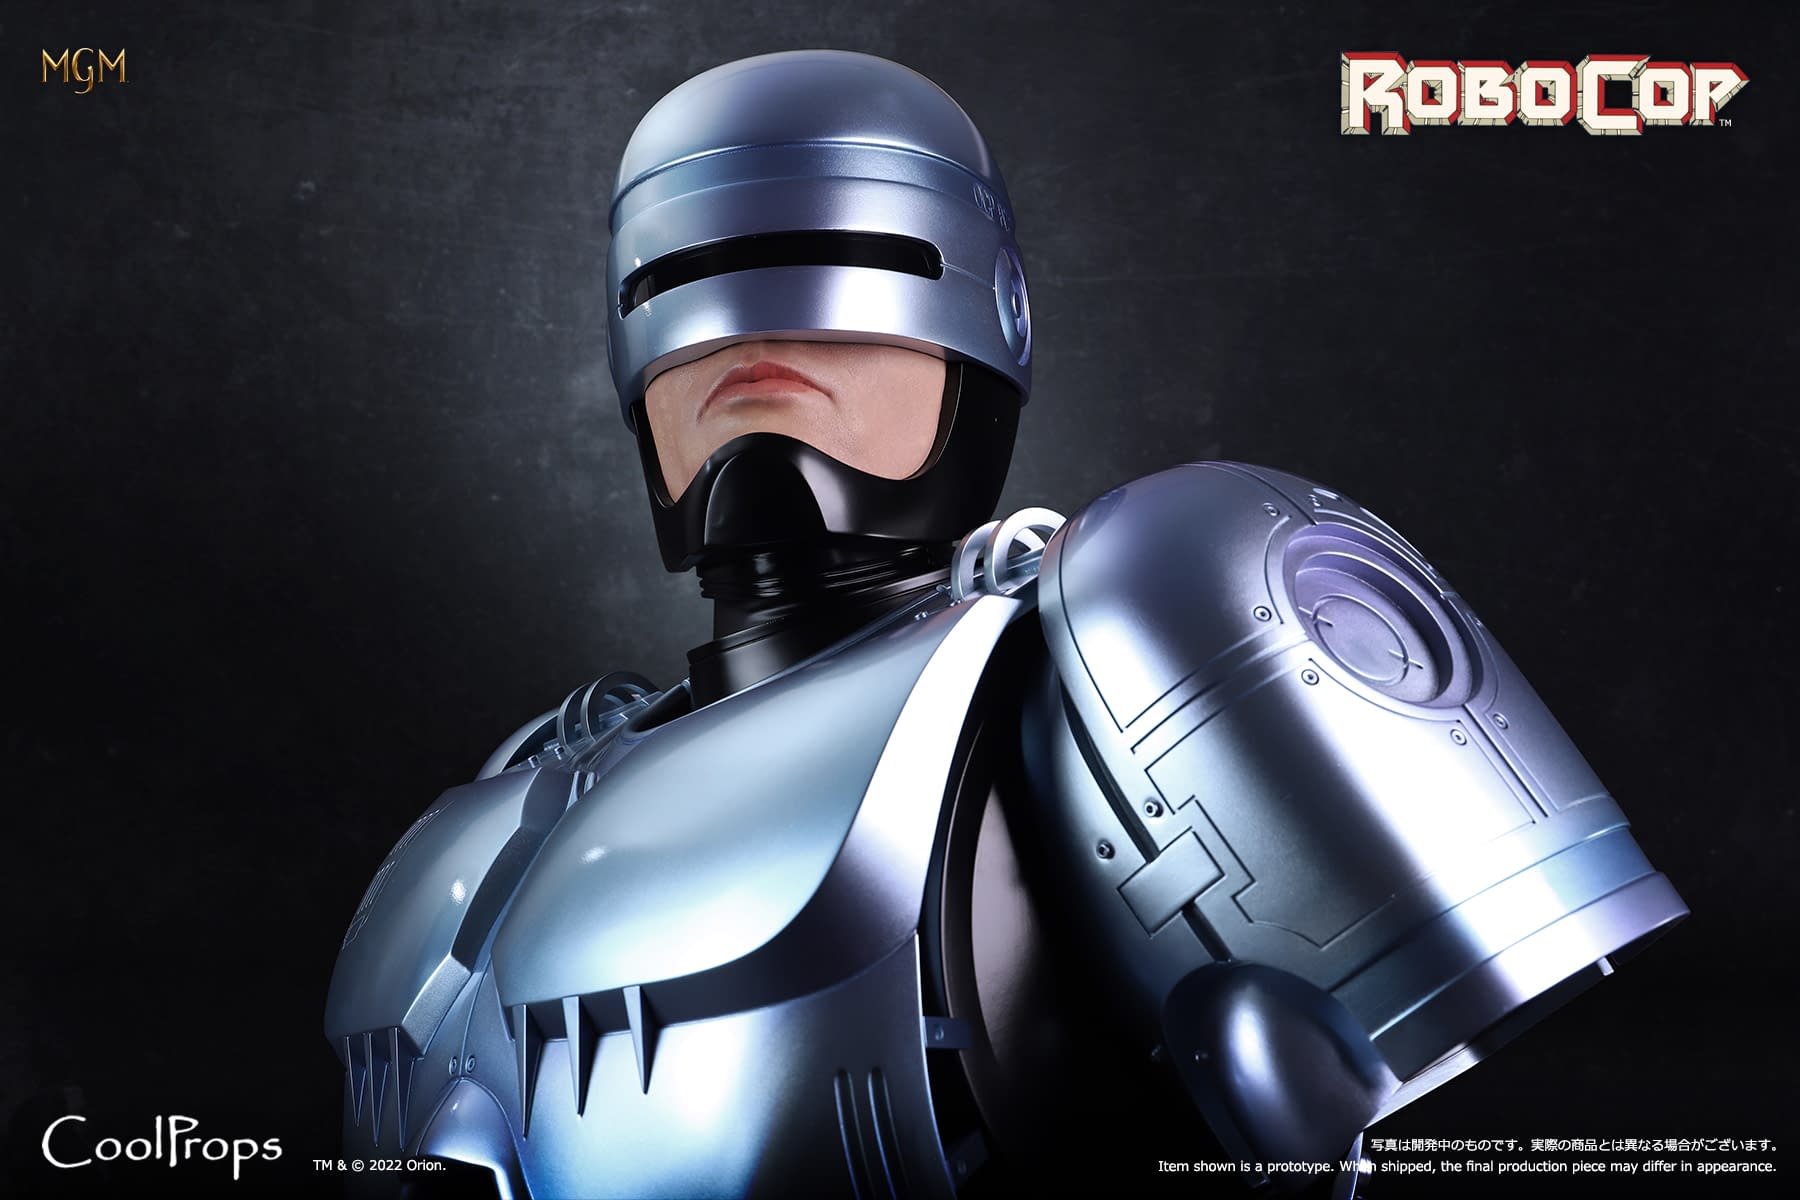 Robocop Receives $3,000 Life-Size Bust Replica Arrives from CoolProps